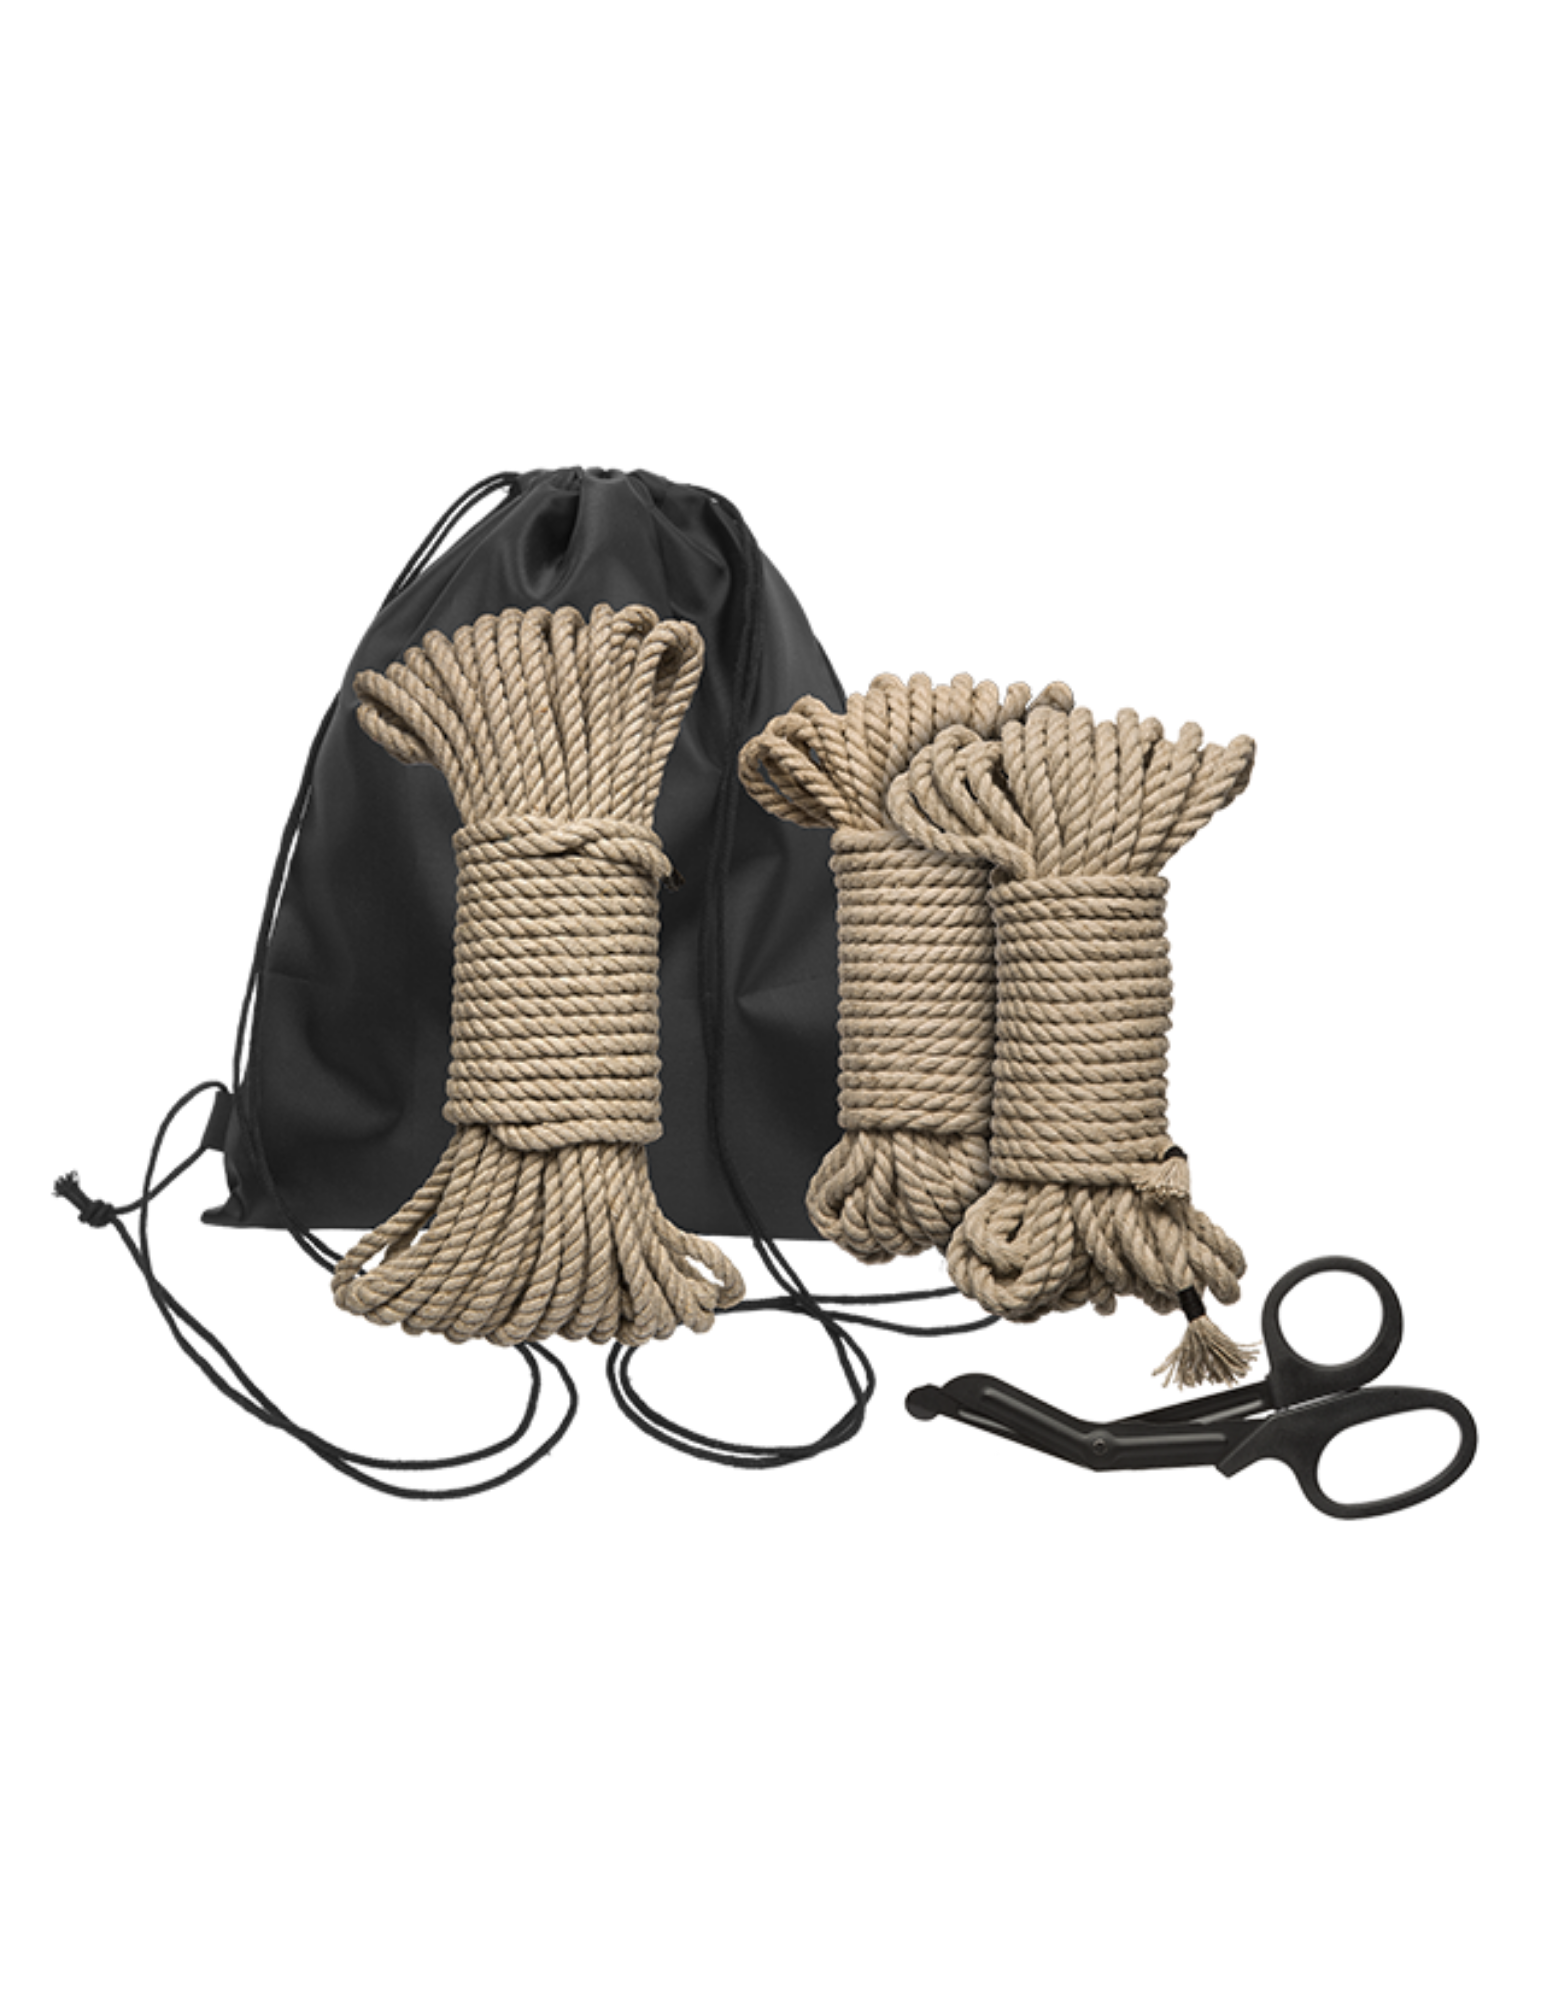 Image shows what comes with the kit: 3 sections of rope, safety scissors, and carrying bag.